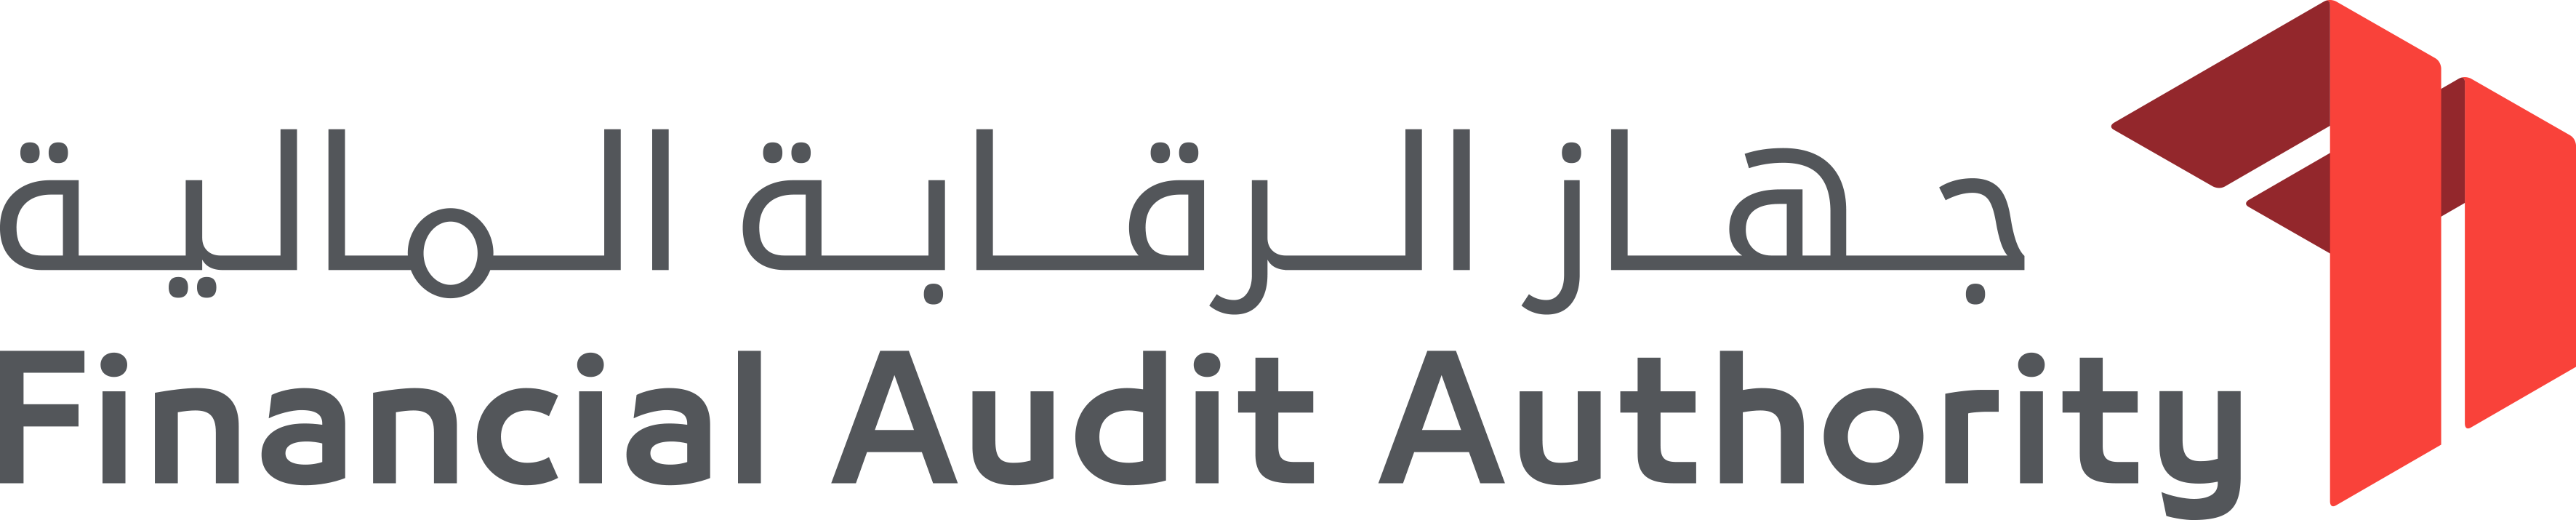 Financial Audit Authority 